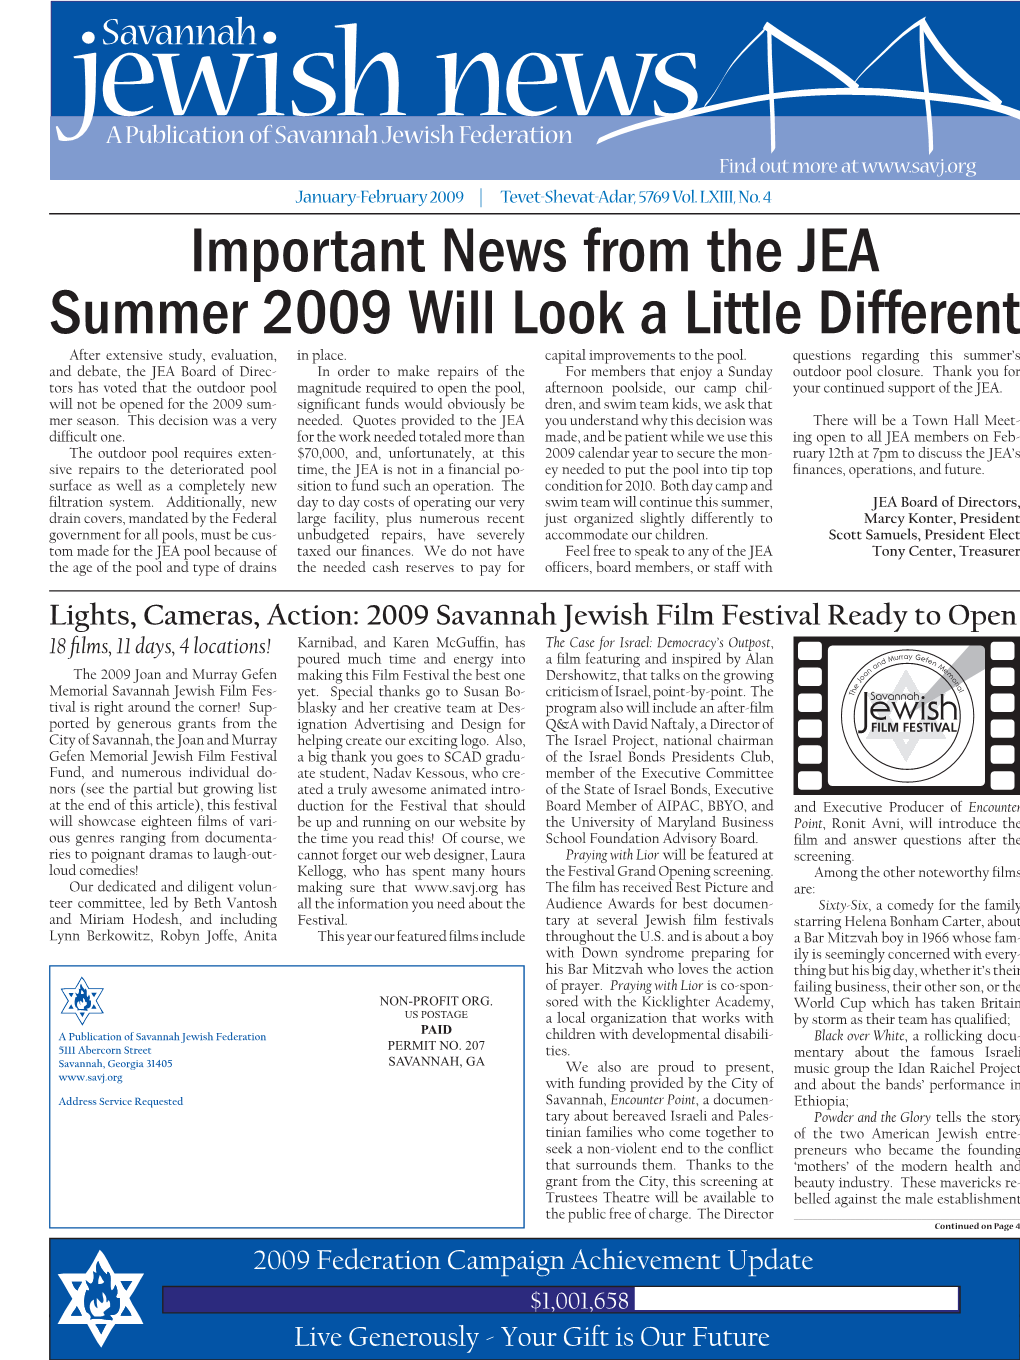 Important News from the JEA Summer 2009 Will Look a Little Different After Extensive Study, Evaluation, in Place